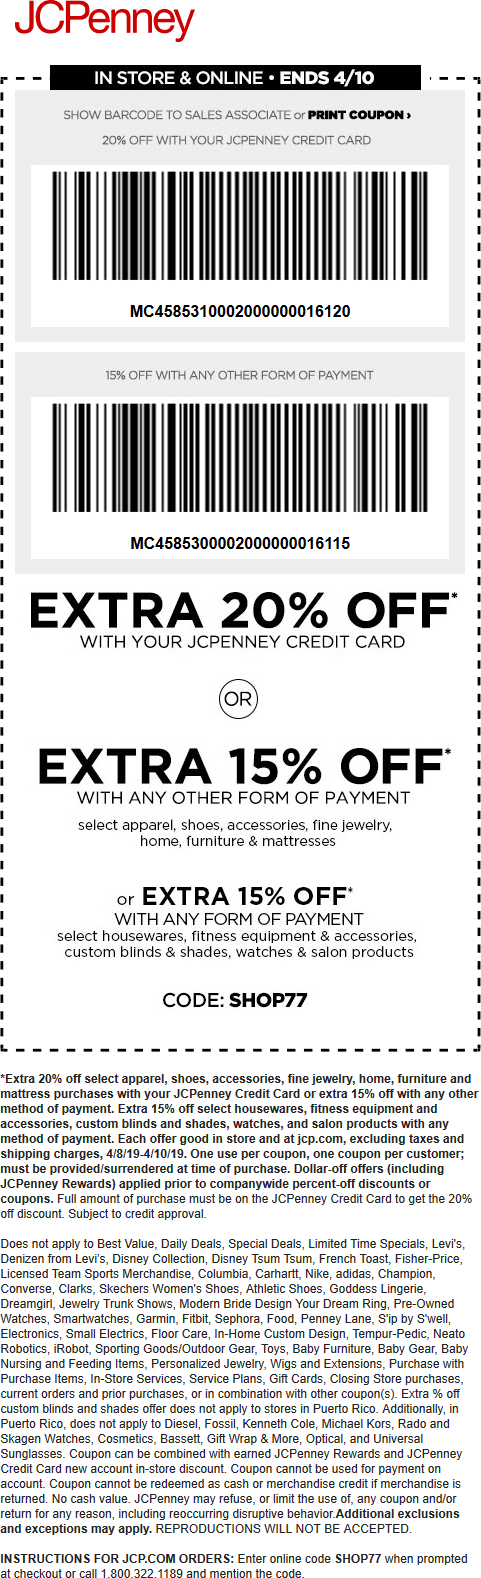 JCPenney coupons & promo code for [January 2022]